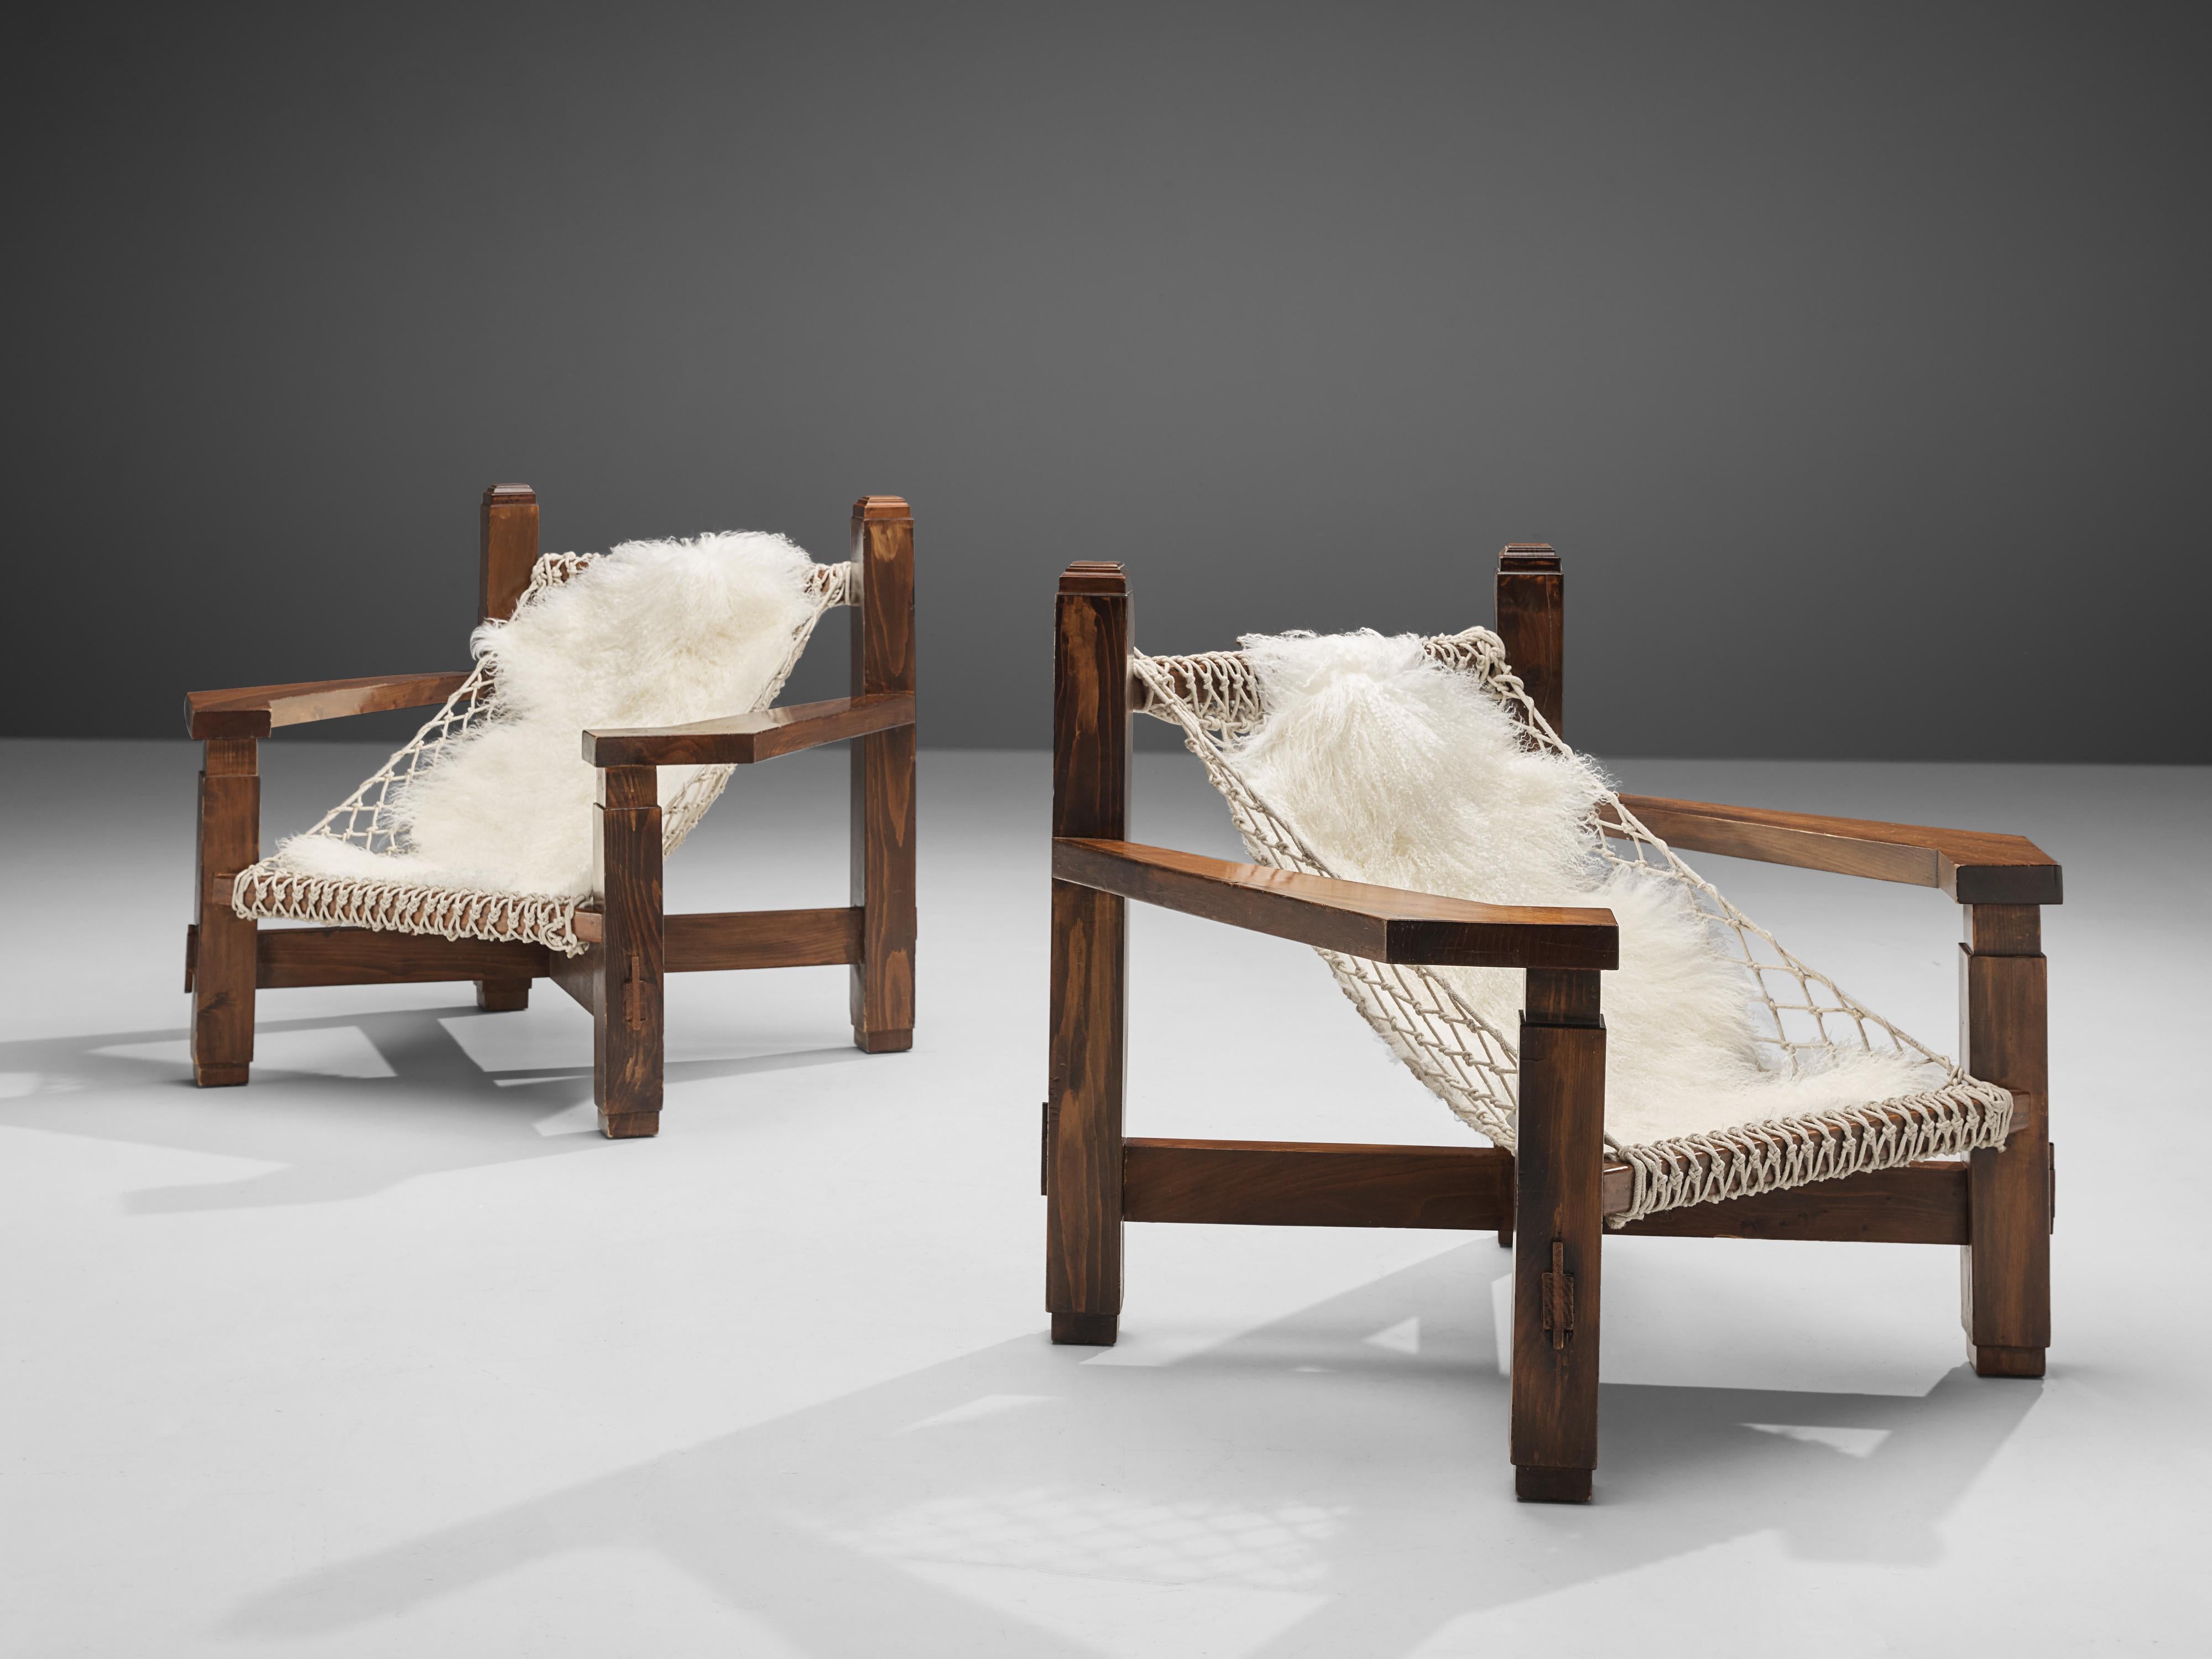 Lounge chairs, stained pine, rope, Italy, 1970s

The designer of this Italian lounge chair truly wanted to impress the viewer with a monumental, volumetric design. The wide frame in stained pine features wonderful lines. Par example, the decorative